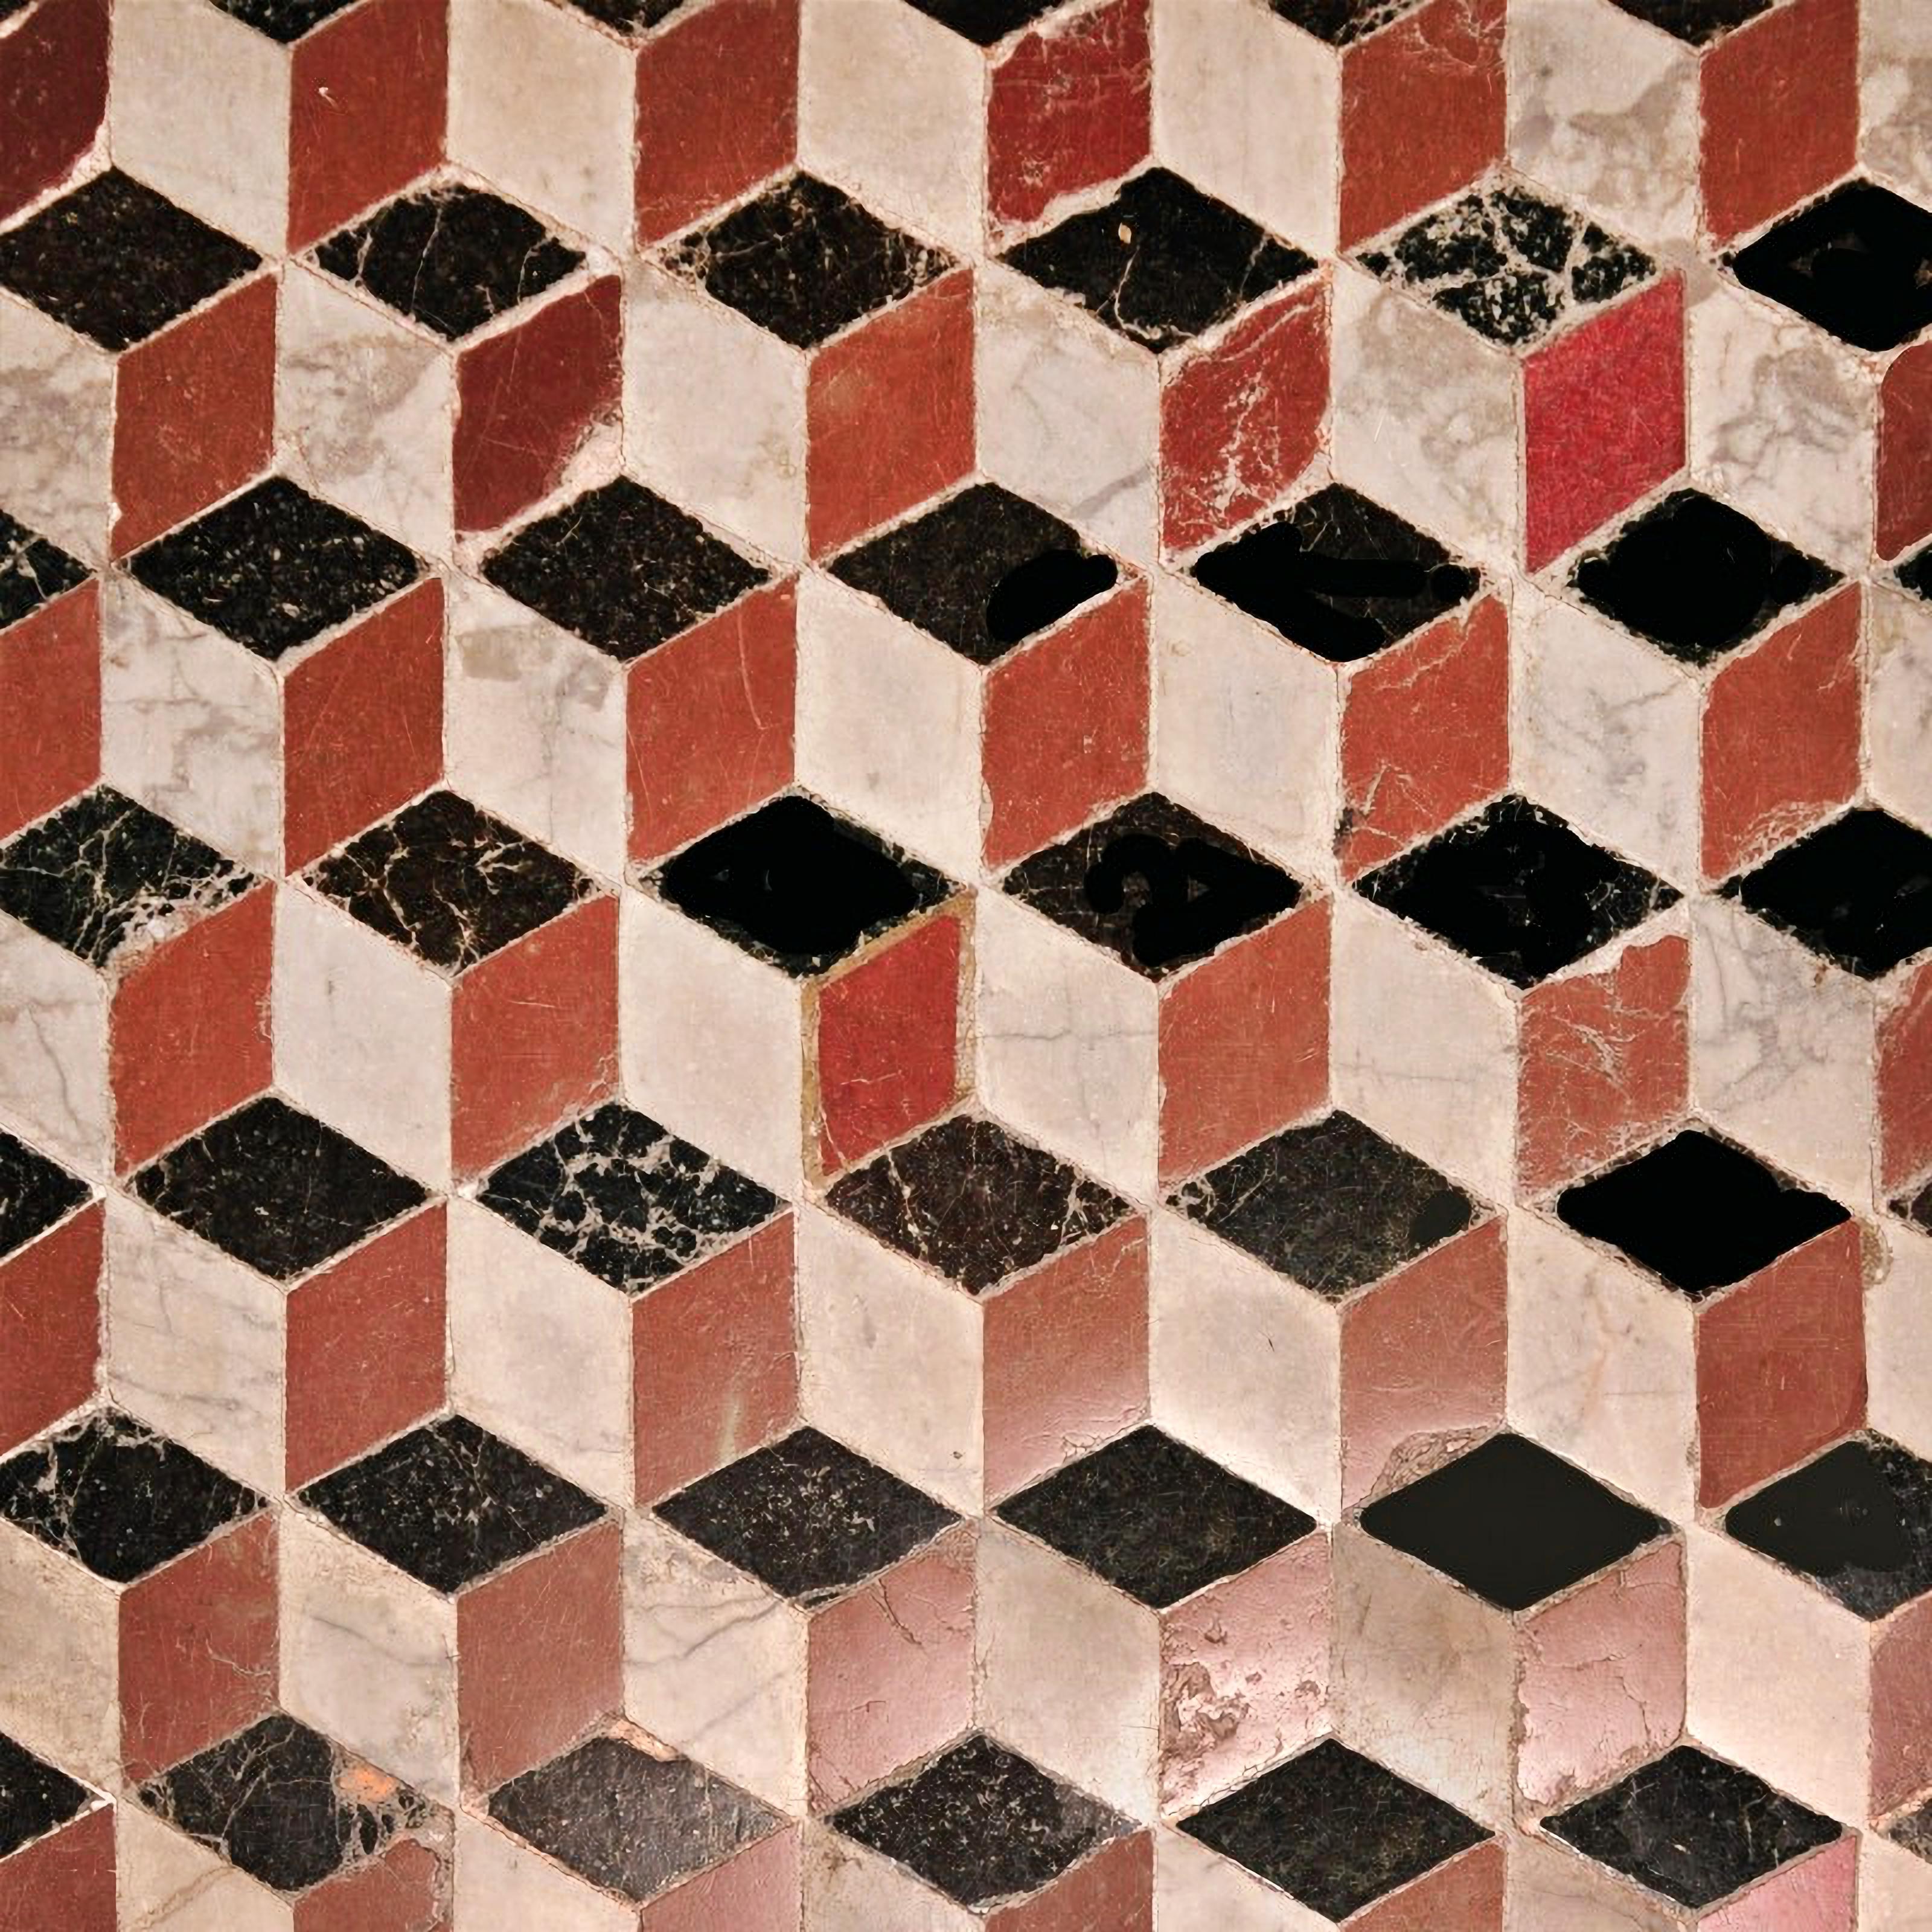 FLOOR WITH ASYMMETRIC RHOMBLES OF ARTESIA, COTTO AND CARRARA MARBLE early 20th Century

Made with Cicagna slate, ancient Tuscan reclaimed terracotta and white Carrara marble.
Delivery times: 40/50 working days from the order.
WIDTH 100cm
LENGTH